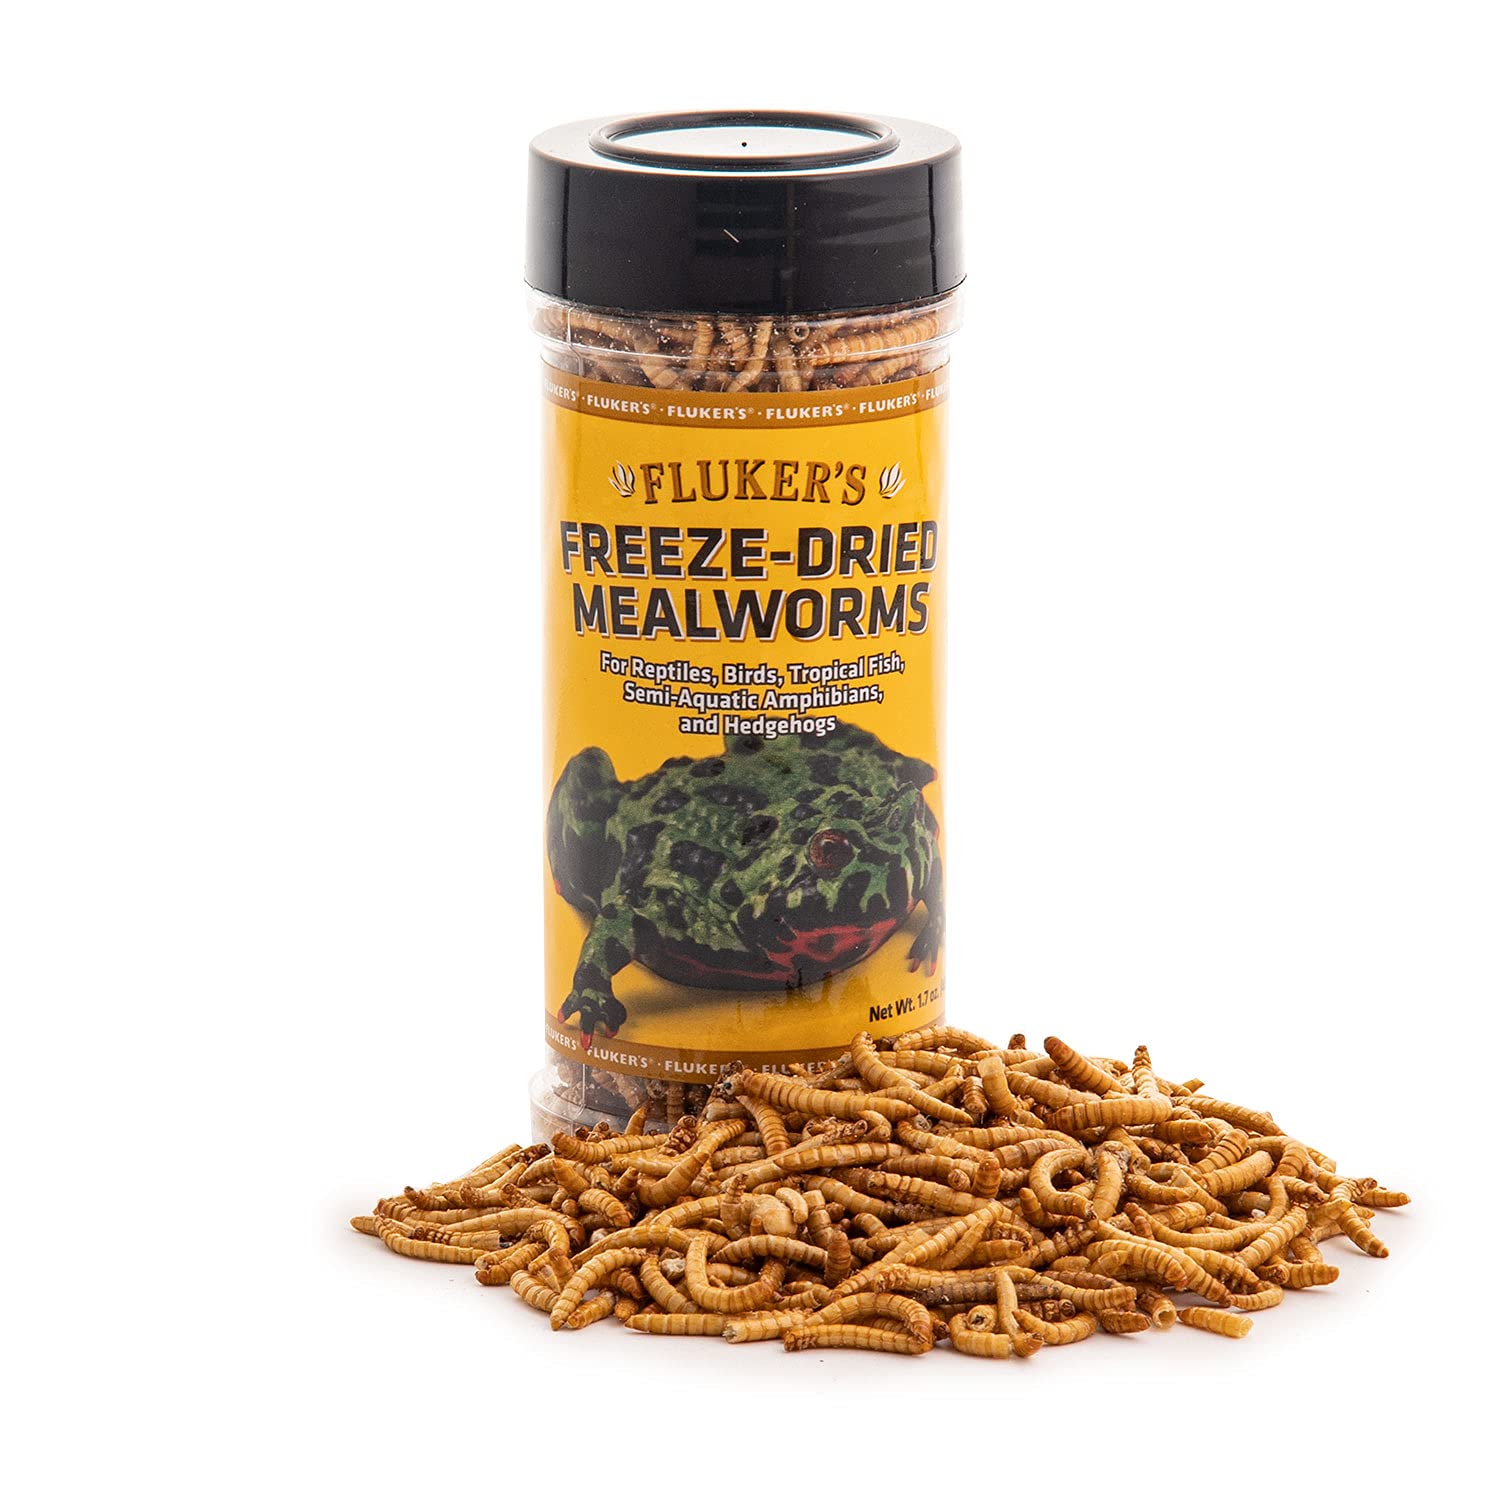 Are Freeze-Dried Worms Good For Bearded Dragons?